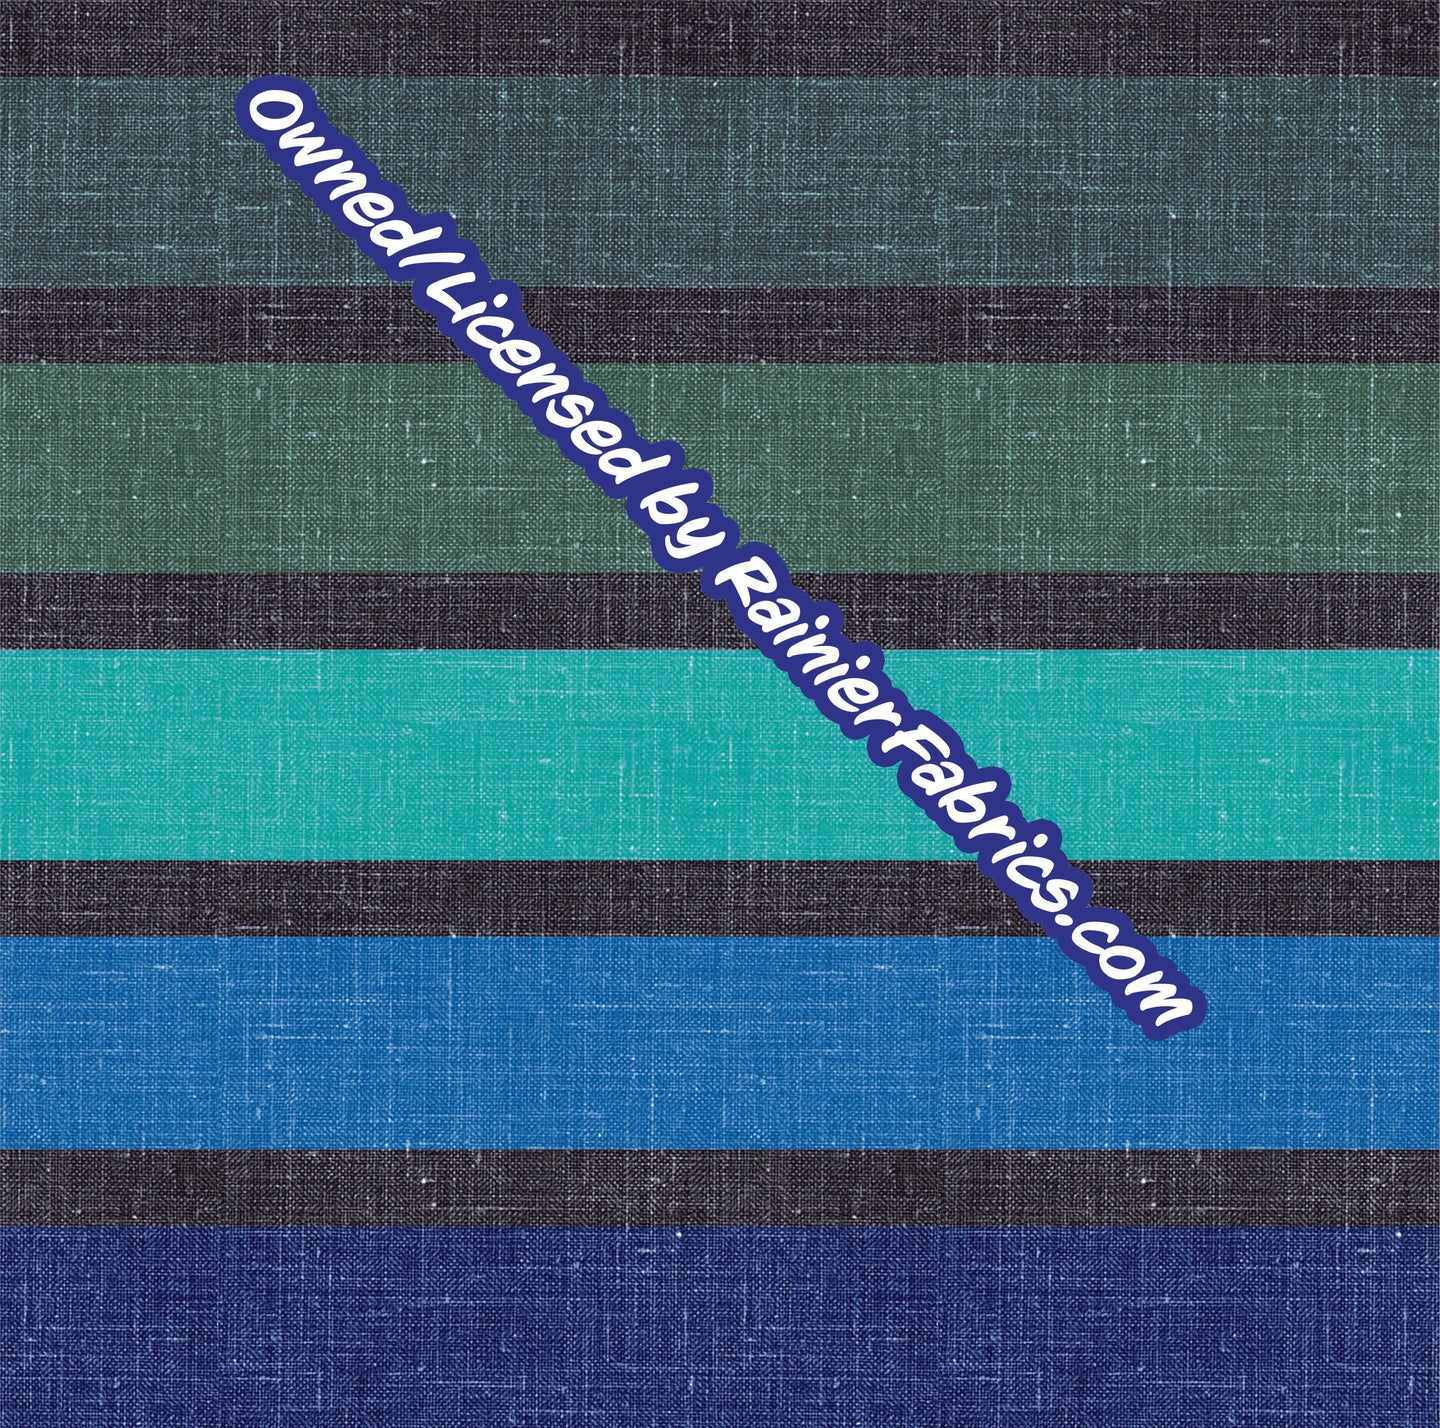 Peacock Stripes on Linen from Rosemary Stevenson  - 2-5 day turnaround - Order by 1/2 yard; Description of bases below